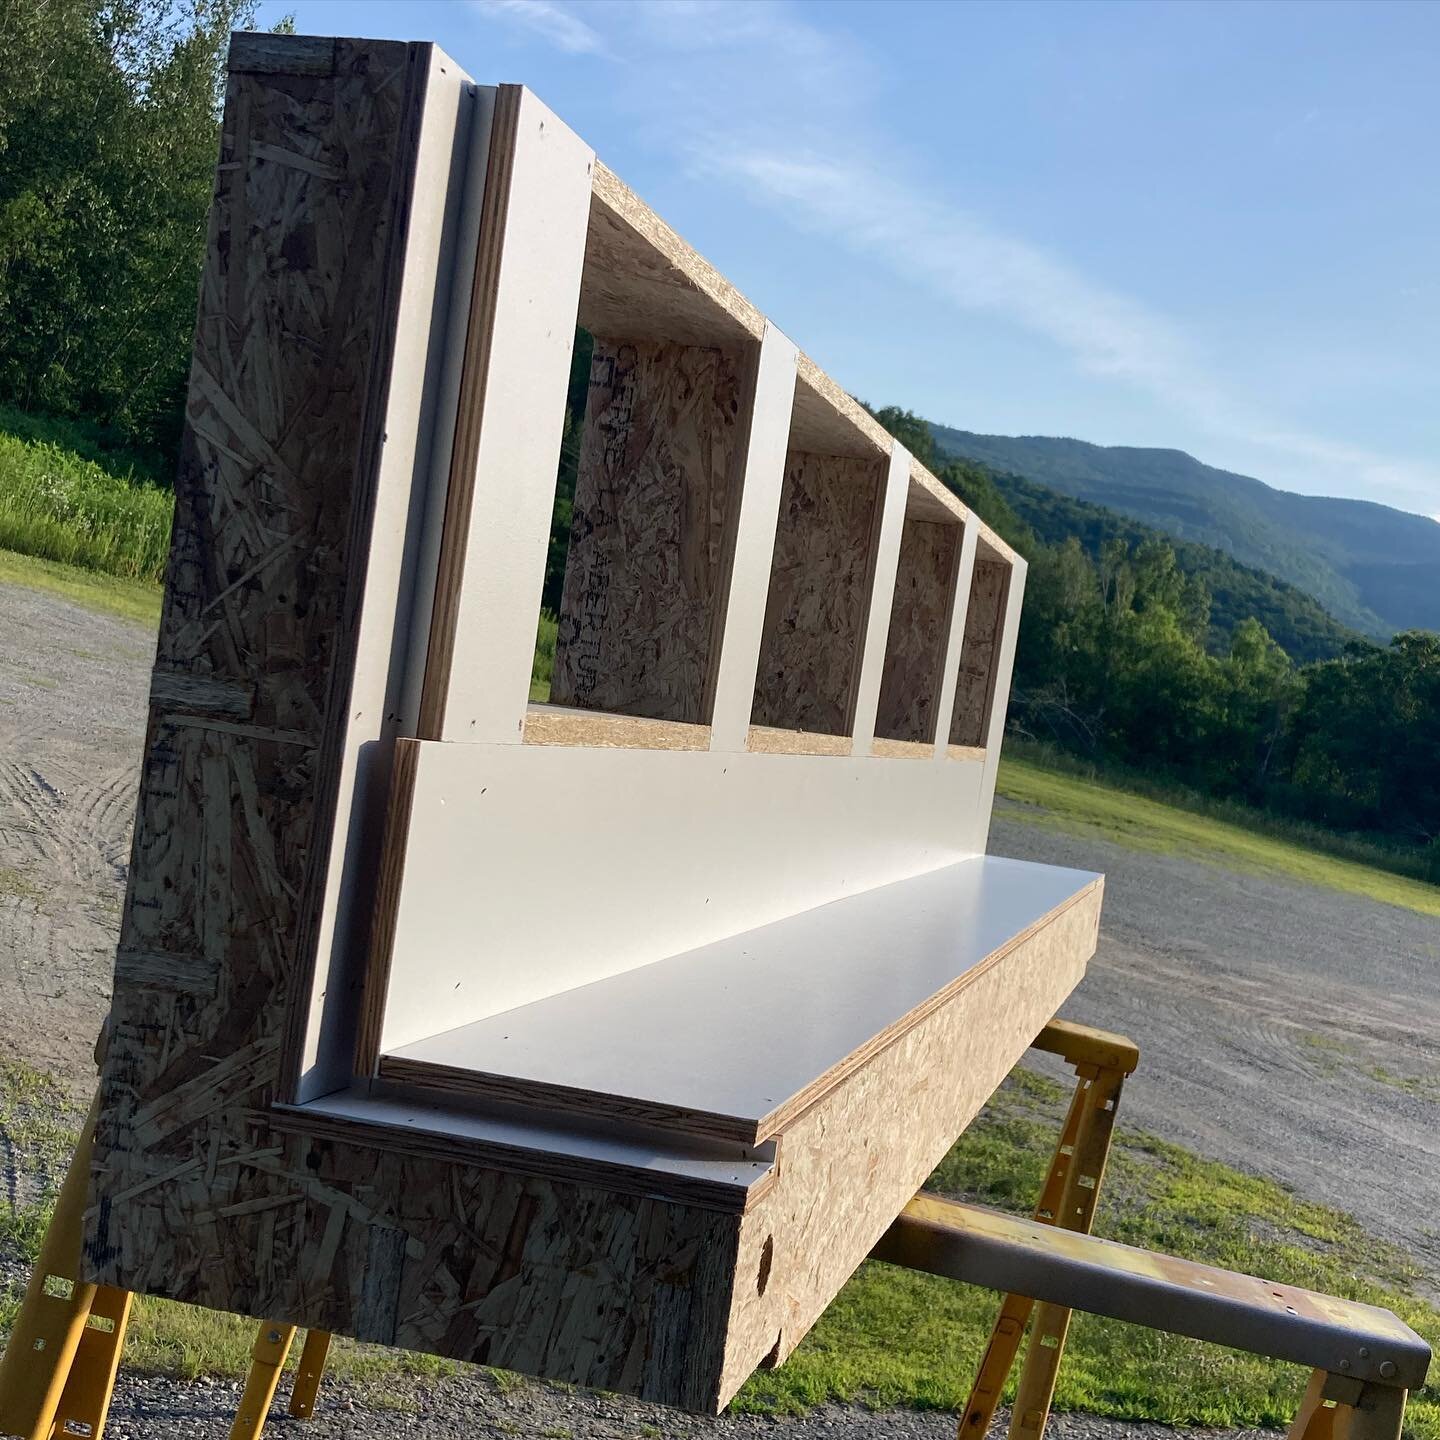 How we rock a corner. A rare look at the engineering in our SATELLITEs. Come see us in Johnson VT and see more. 
. 
.
.
#upendthis #findyourorbit #changetheworld #architecture #sustainability #modular #design #innovation #vermontbyvermonters #vermont